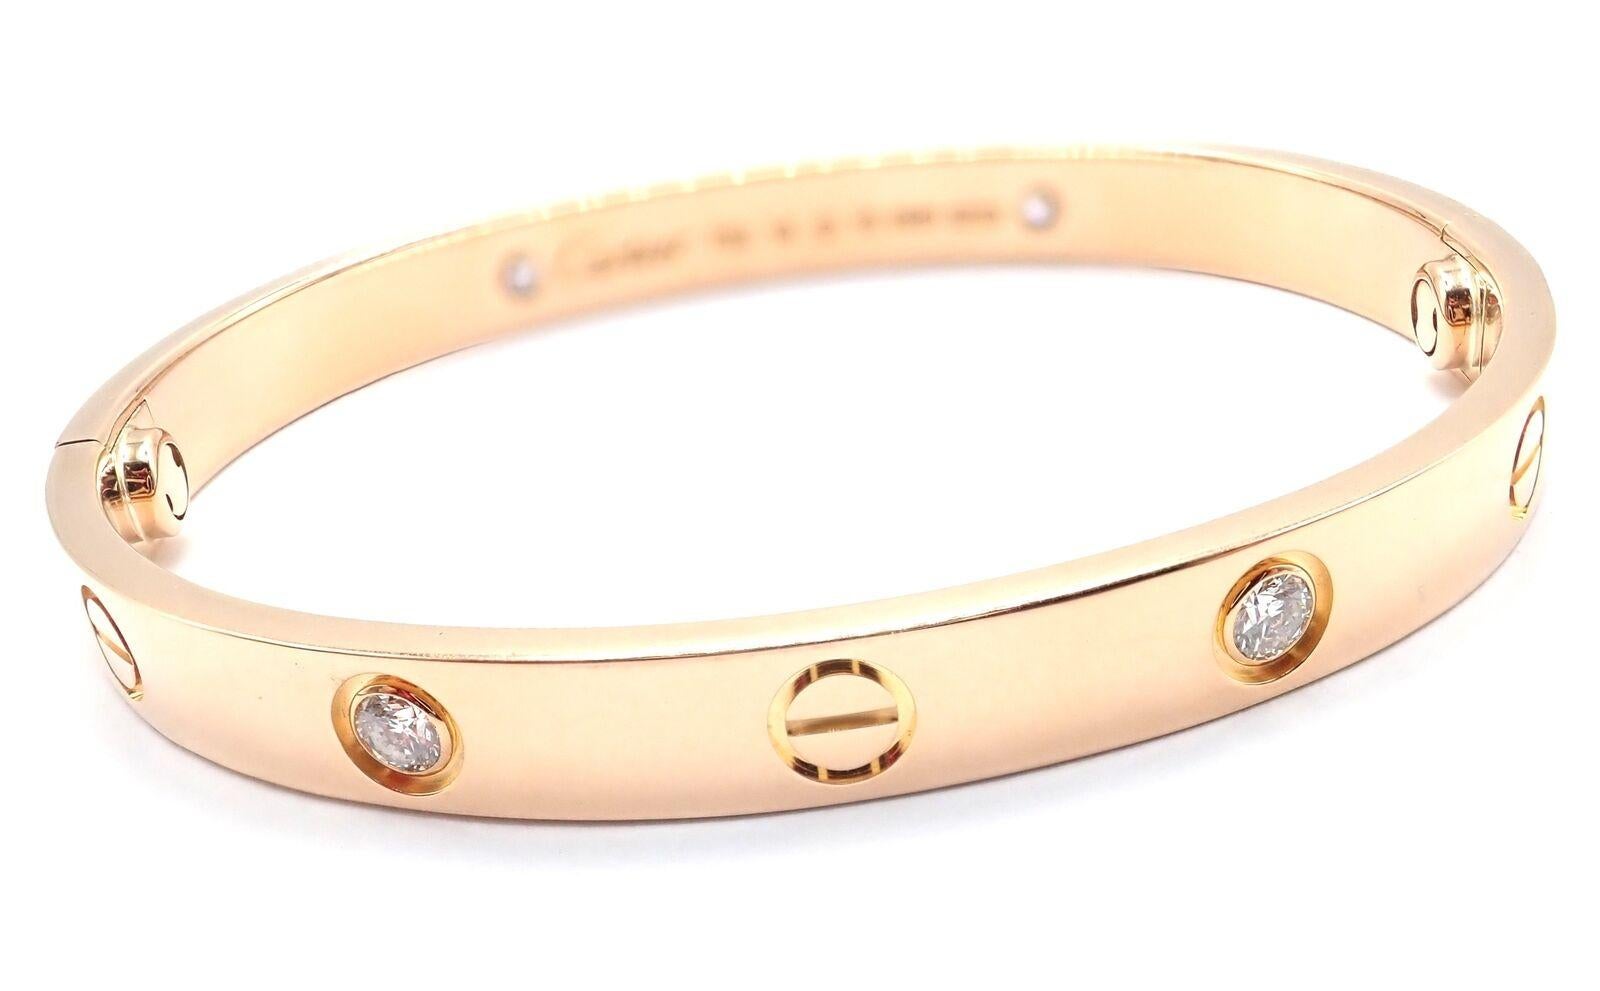 18k Rose Gold 4 Diamond Cartier LOVE Bangle Bracelet. Size 16. 
This bracelet comes with Cartier certificate of authenticity from 2014, Cartier box and a screwdriver.
This bracelet has a new style screw system.
With 4 round brilliant cut diamonds,